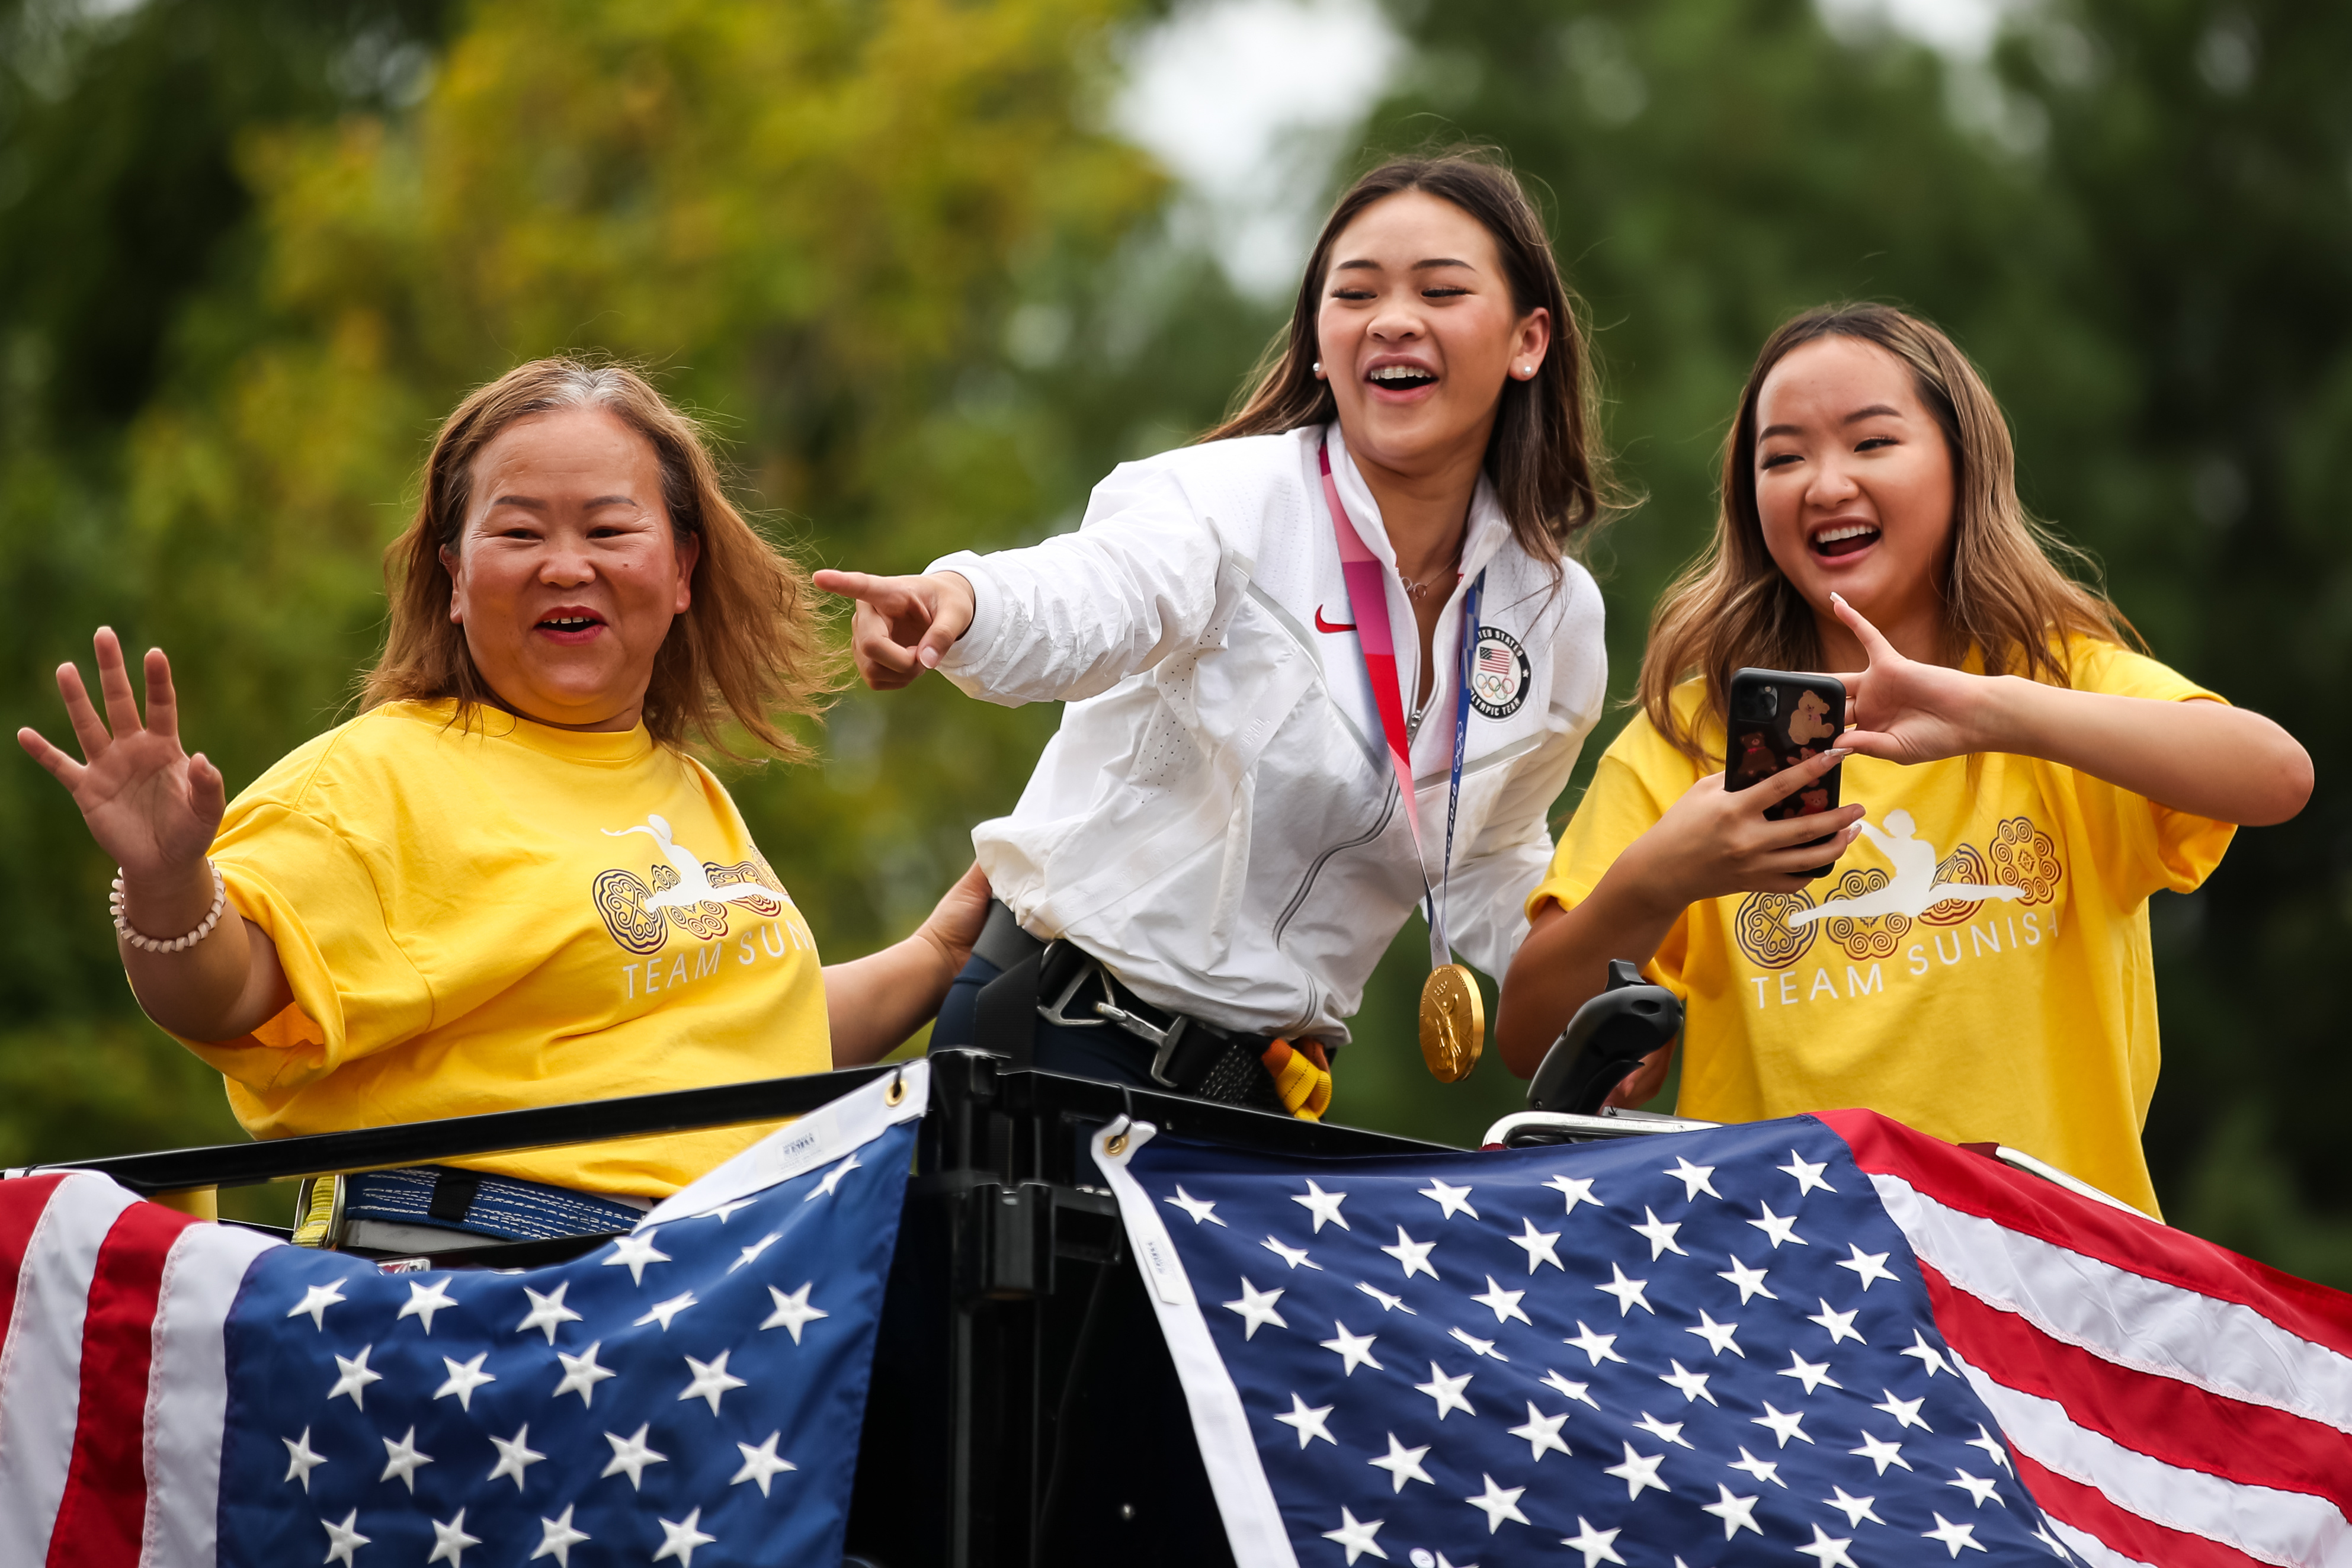 Aug 8, 2021; St. Paul, MN, USA; Olympic Gold Medalist Suni Lee reacts to fans during a parade. Mandatory Credit: David Berding-USA TODAY Sports